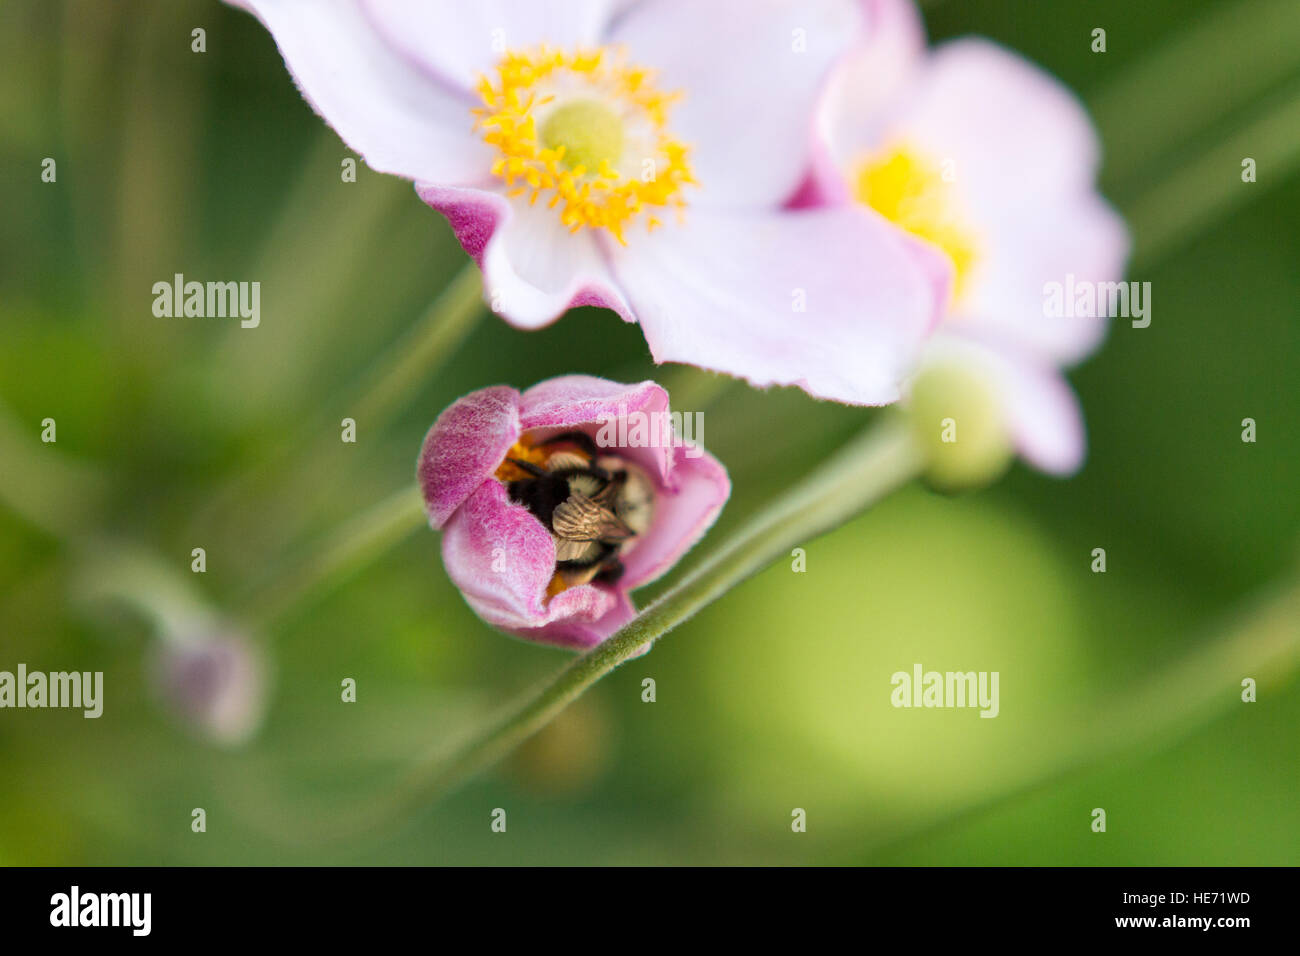 Bumble bee inside of a pink anemone flower bud Stock Photo